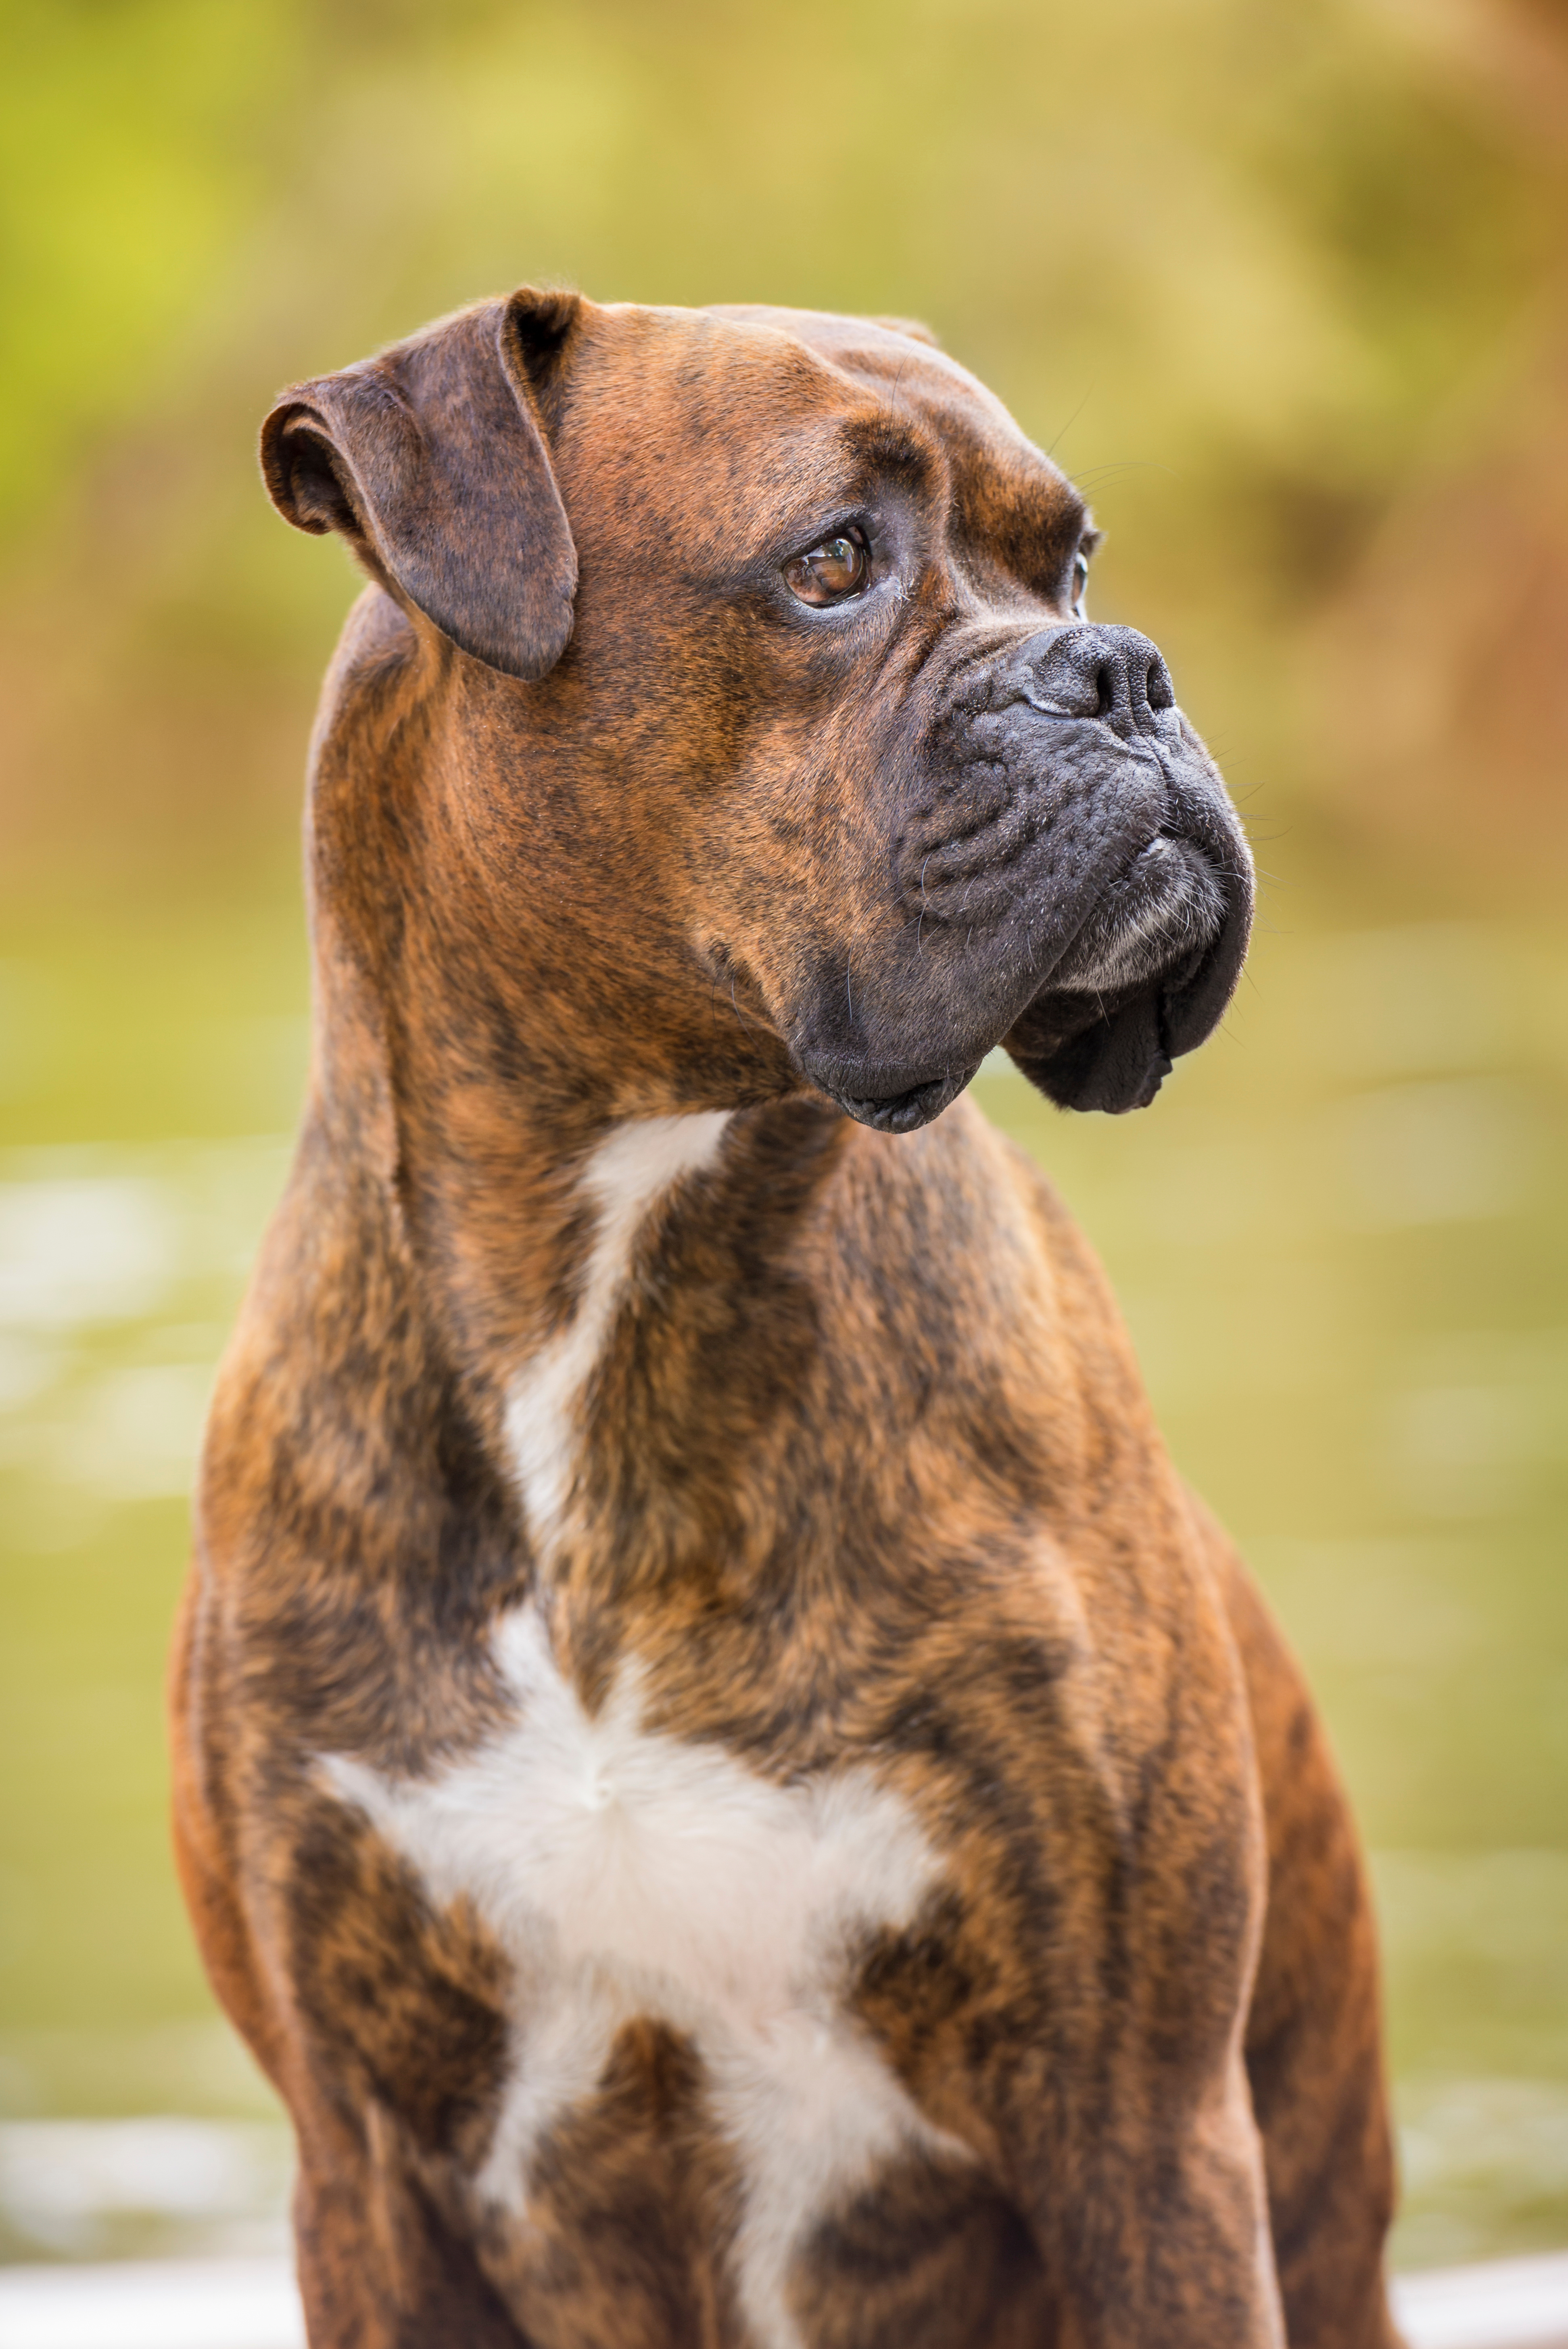 A trained boxer dog - Dog Training Elite of Fort Wayne is the best choice for boxer dog training in Fort Wayne, IN!